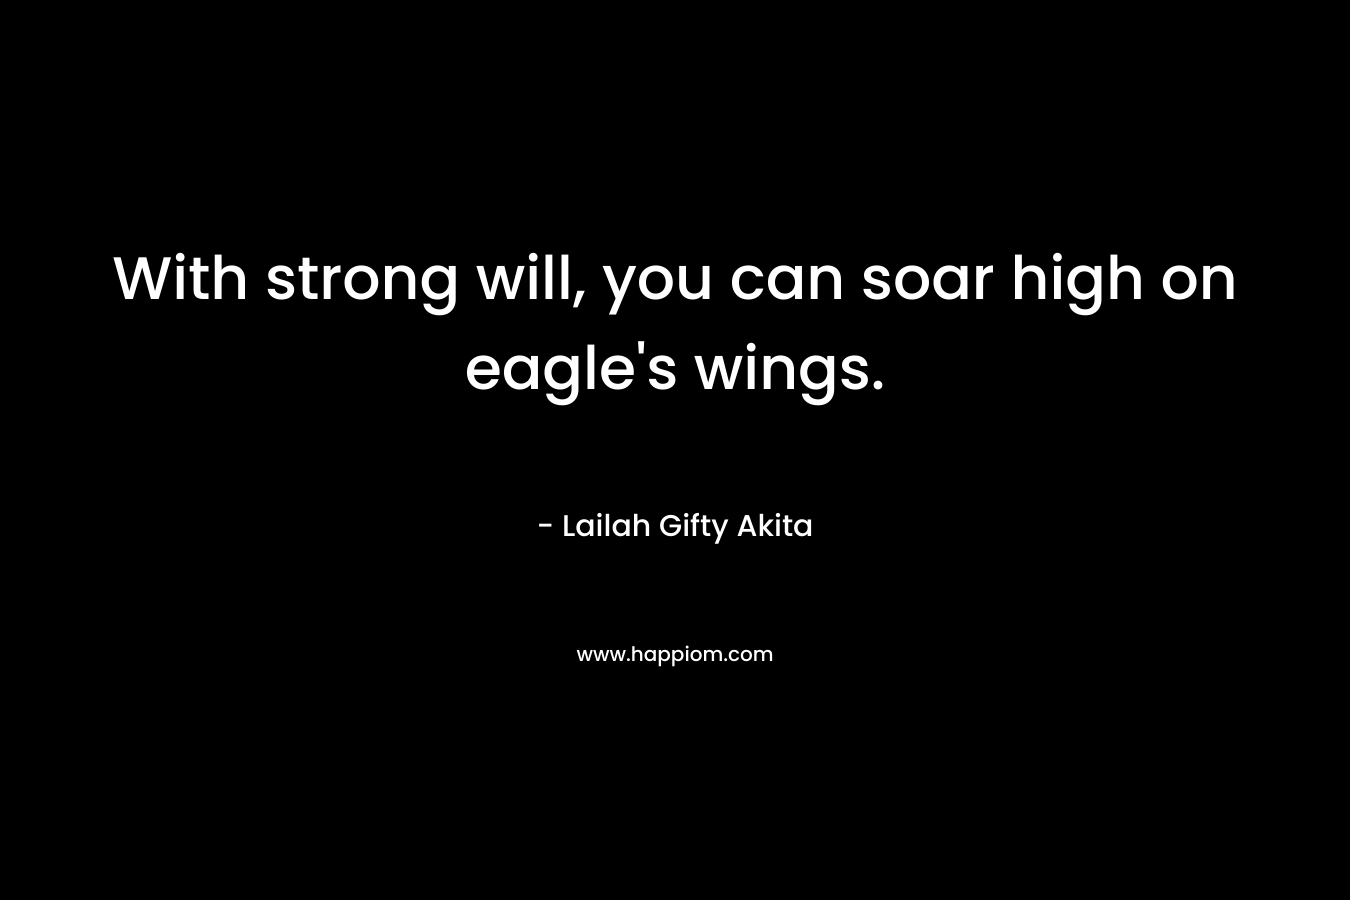 With strong will, you can soar high on eagle’s wings. – Lailah Gifty Akita